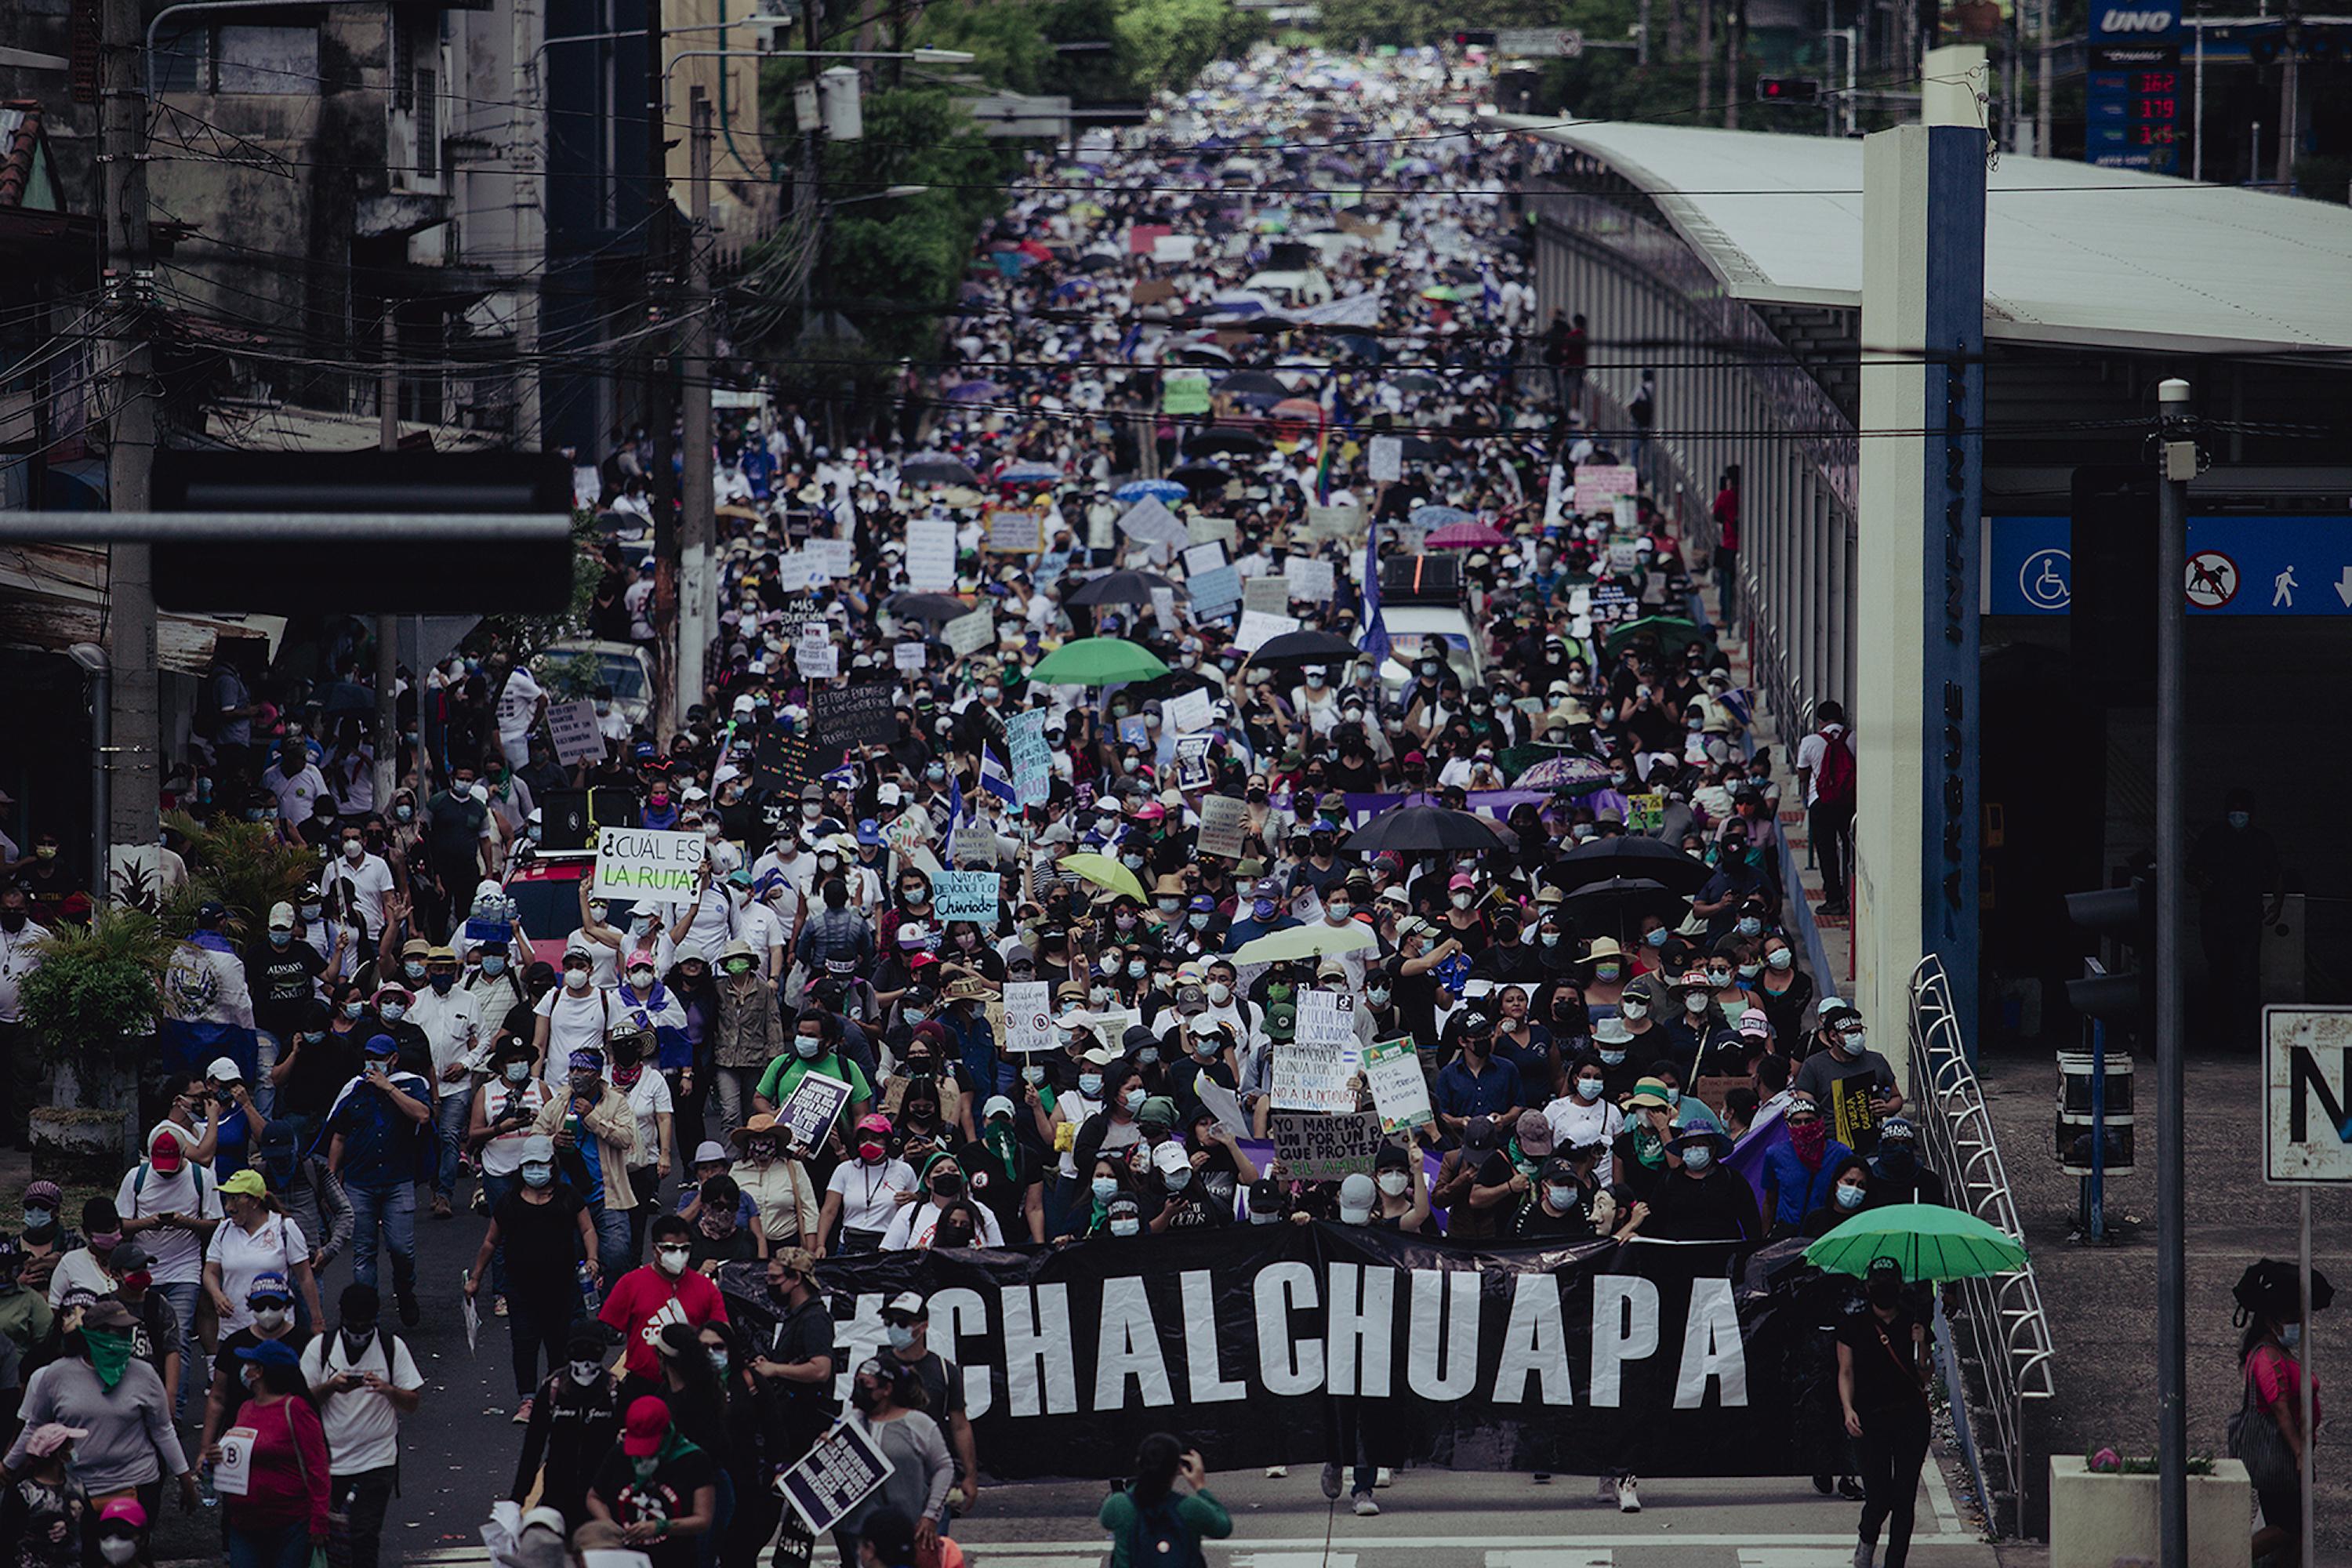 Thousands marched from Cuscatlán Park to Morazán Plaza in protest against the Bukele administration on Sep. 15, 2021, the bicentennial anniversary of Central American independence. Photo: Carlos Barrera/El Faro